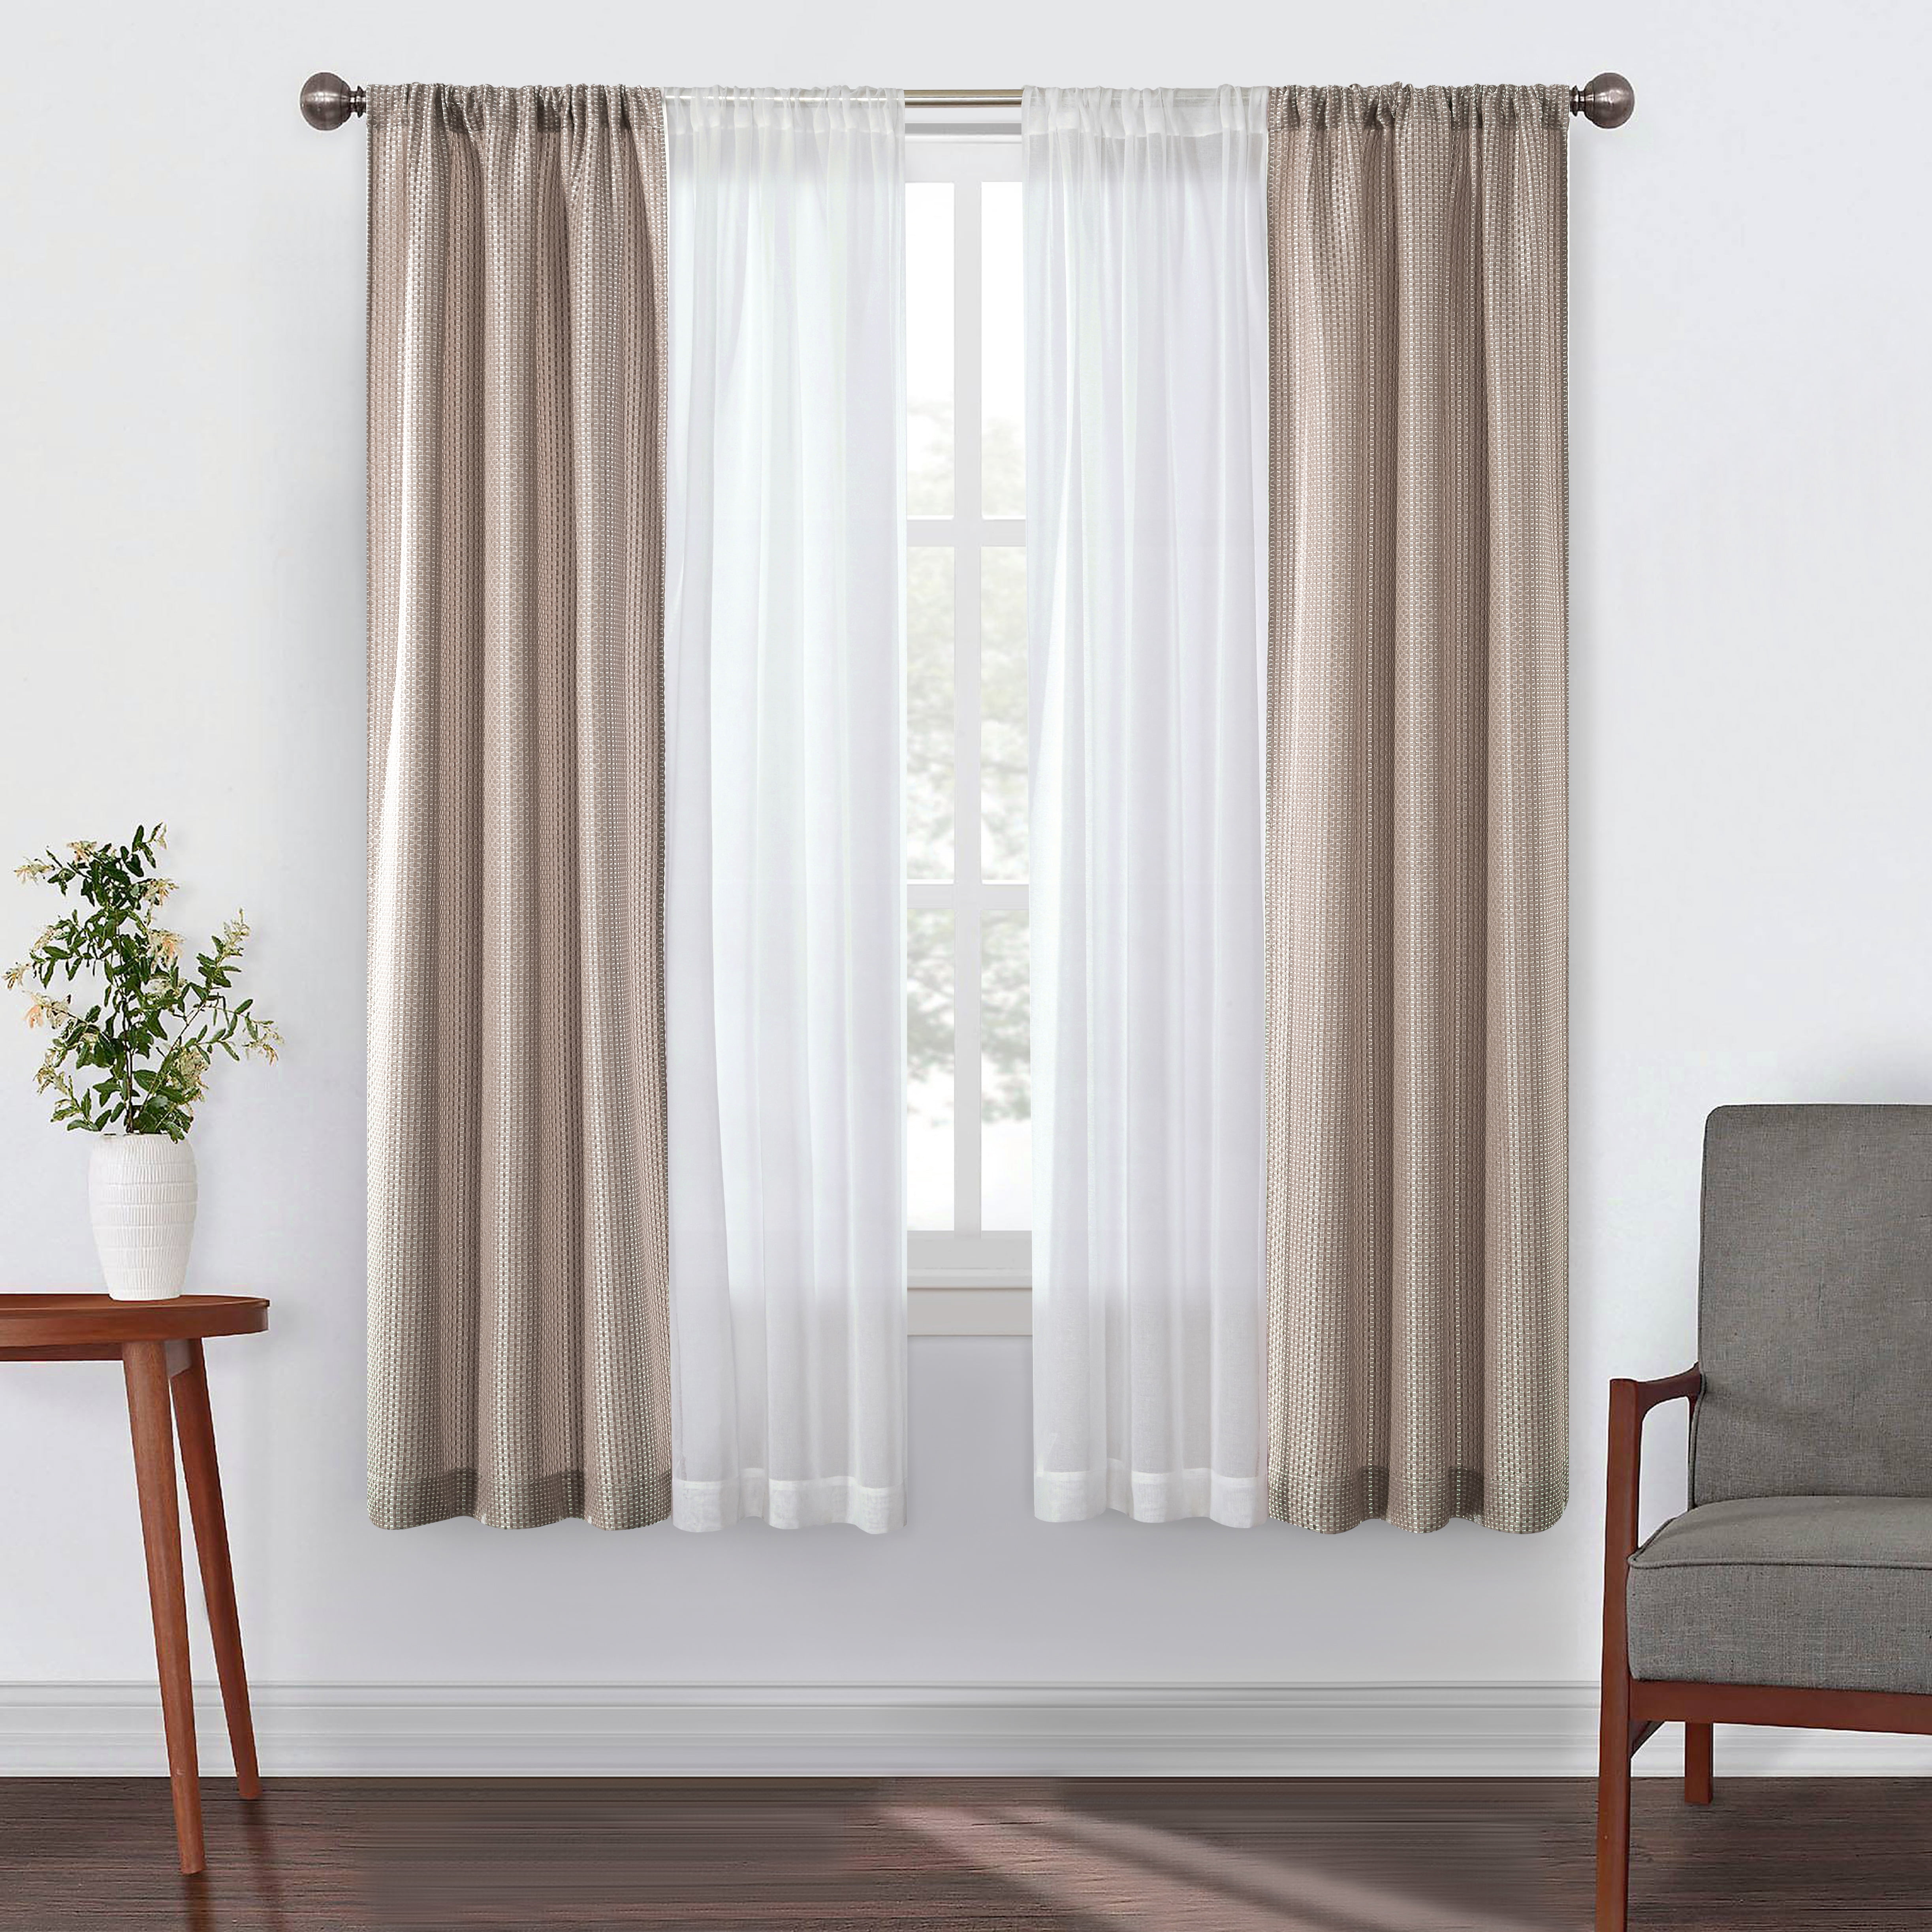 Better Homes & Gardens & 4 Piece 74x63 Taupe & Panel Solid Set, Taupe, Curtain Sheer Stitch Open